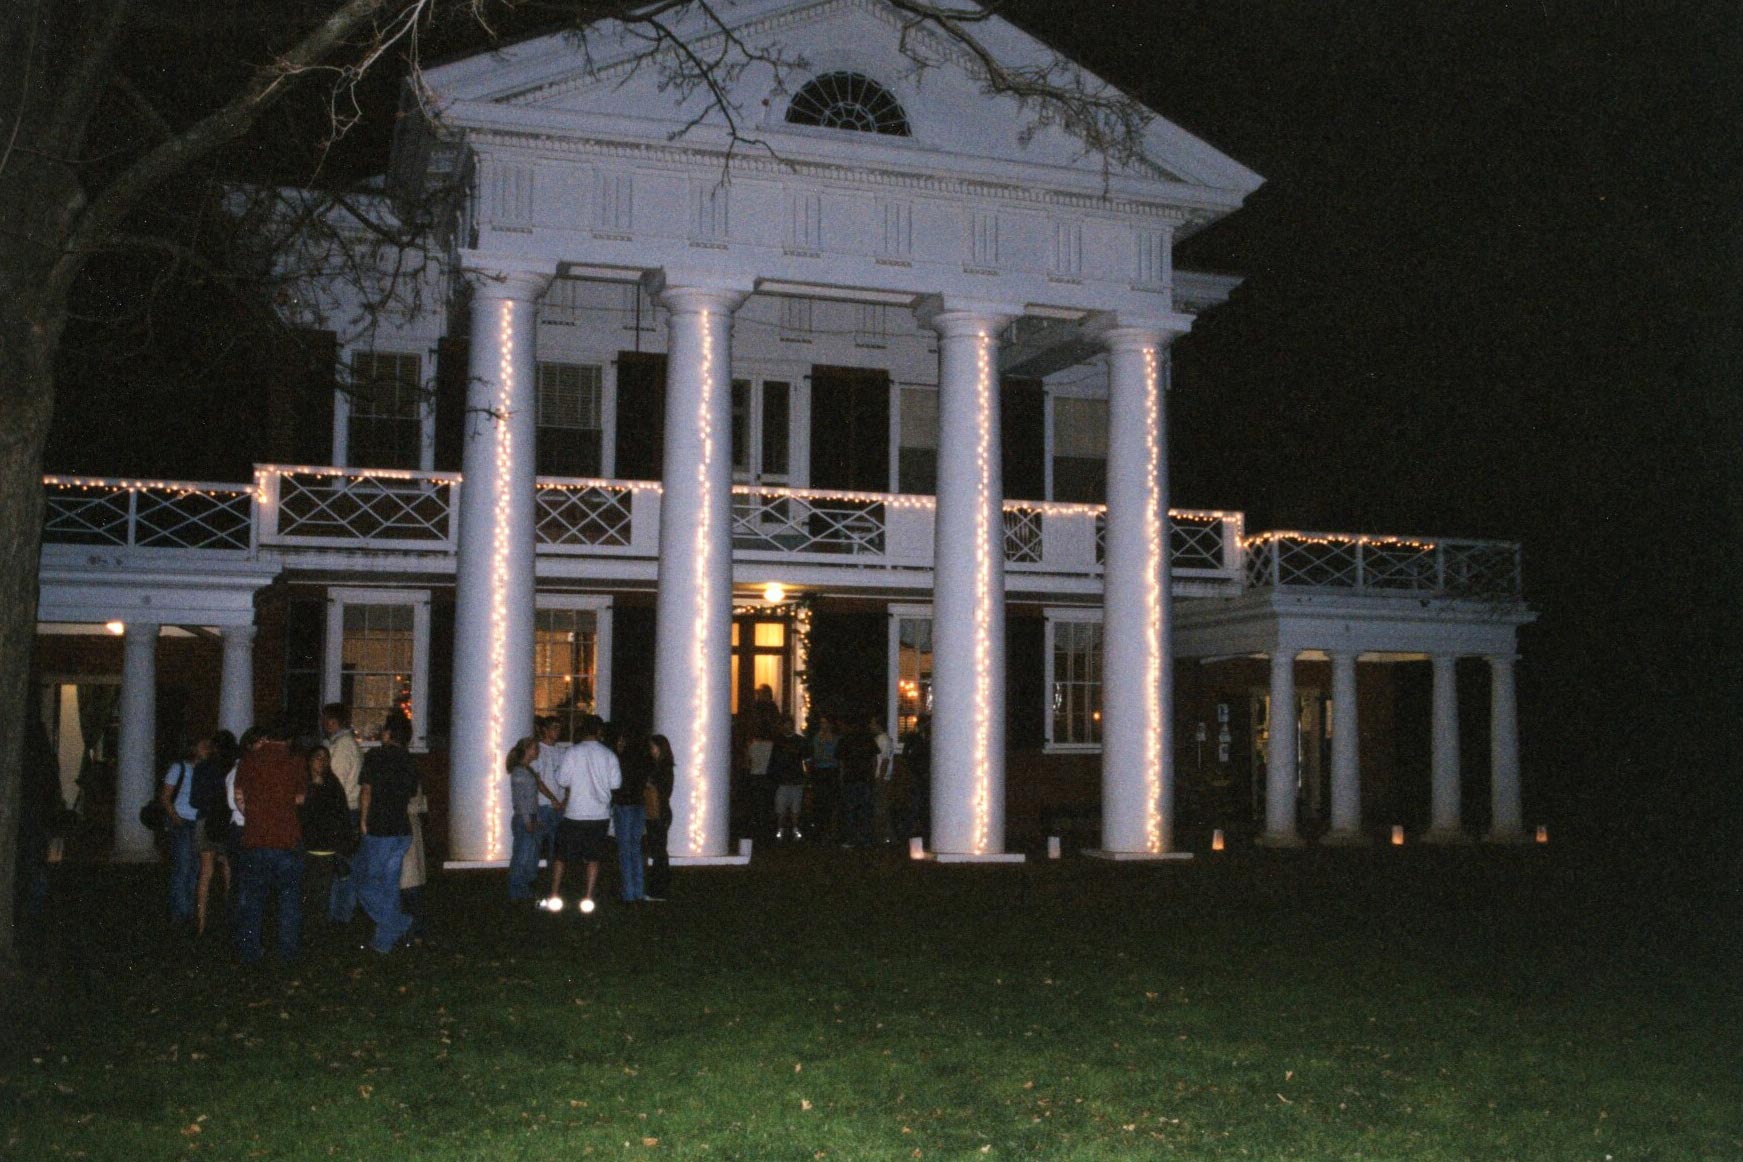 Old image of a Lawn Pavilion with lights on it